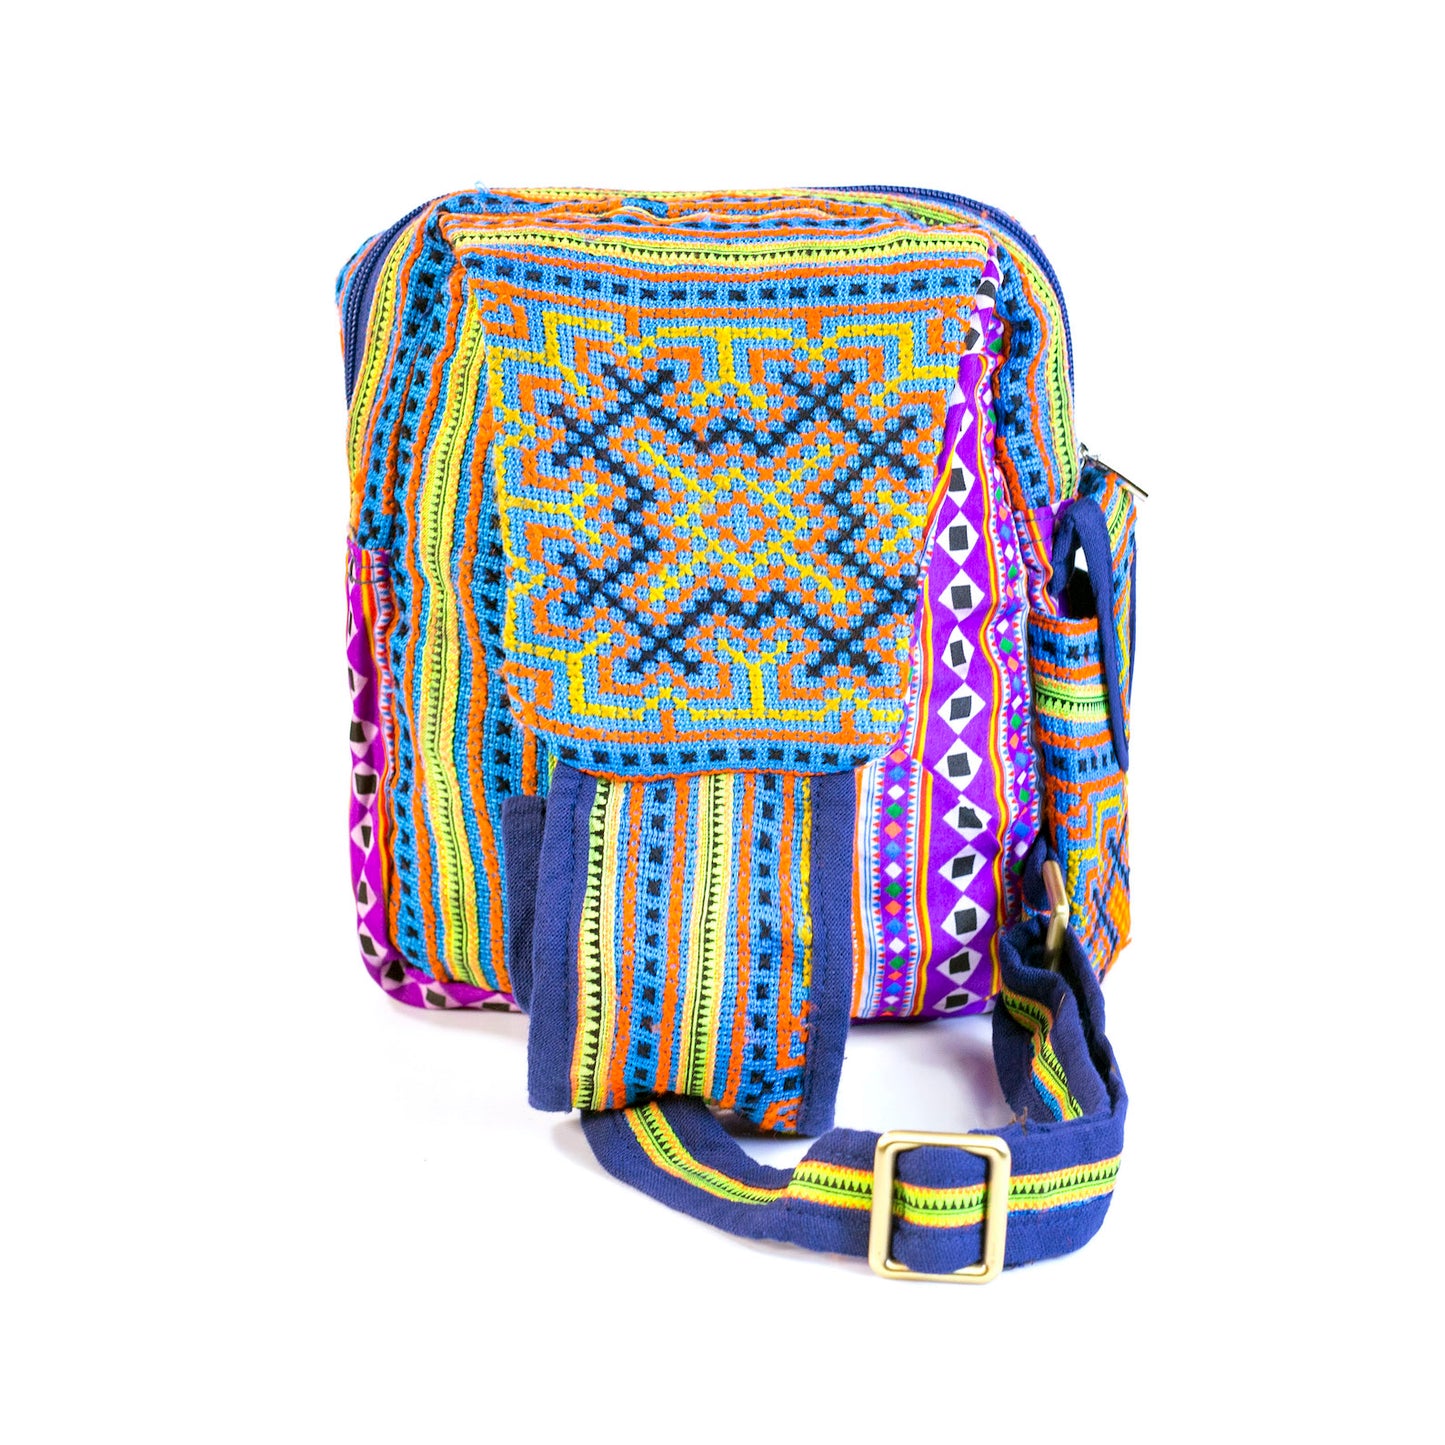 Boho-style linen, embroidery Sling bag, H'mong tribal pattern in PURPLE silk thread